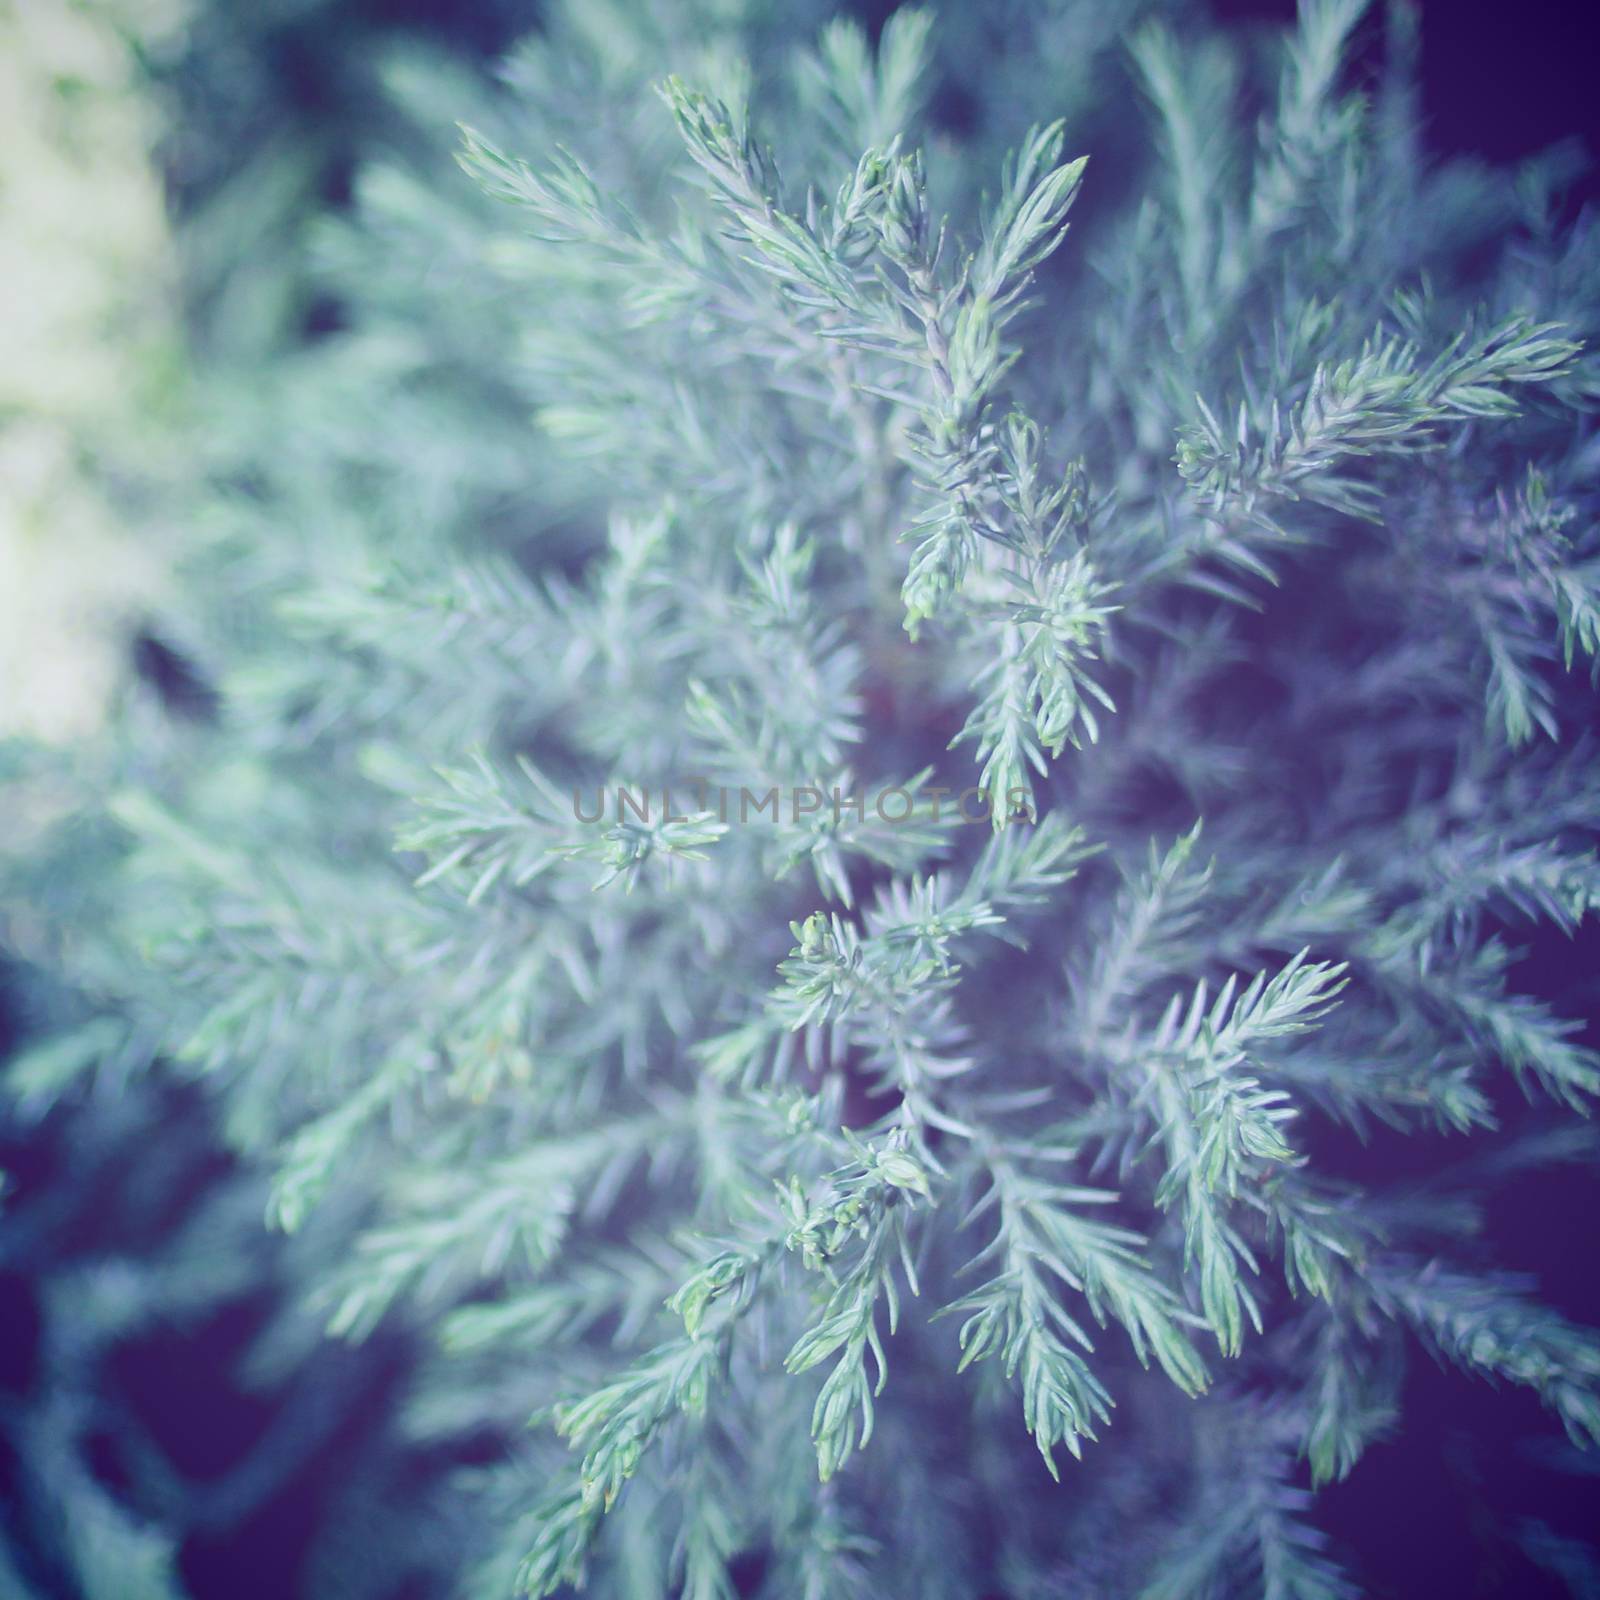 Fresh and green pine tree with retro filter effect by nuchylee